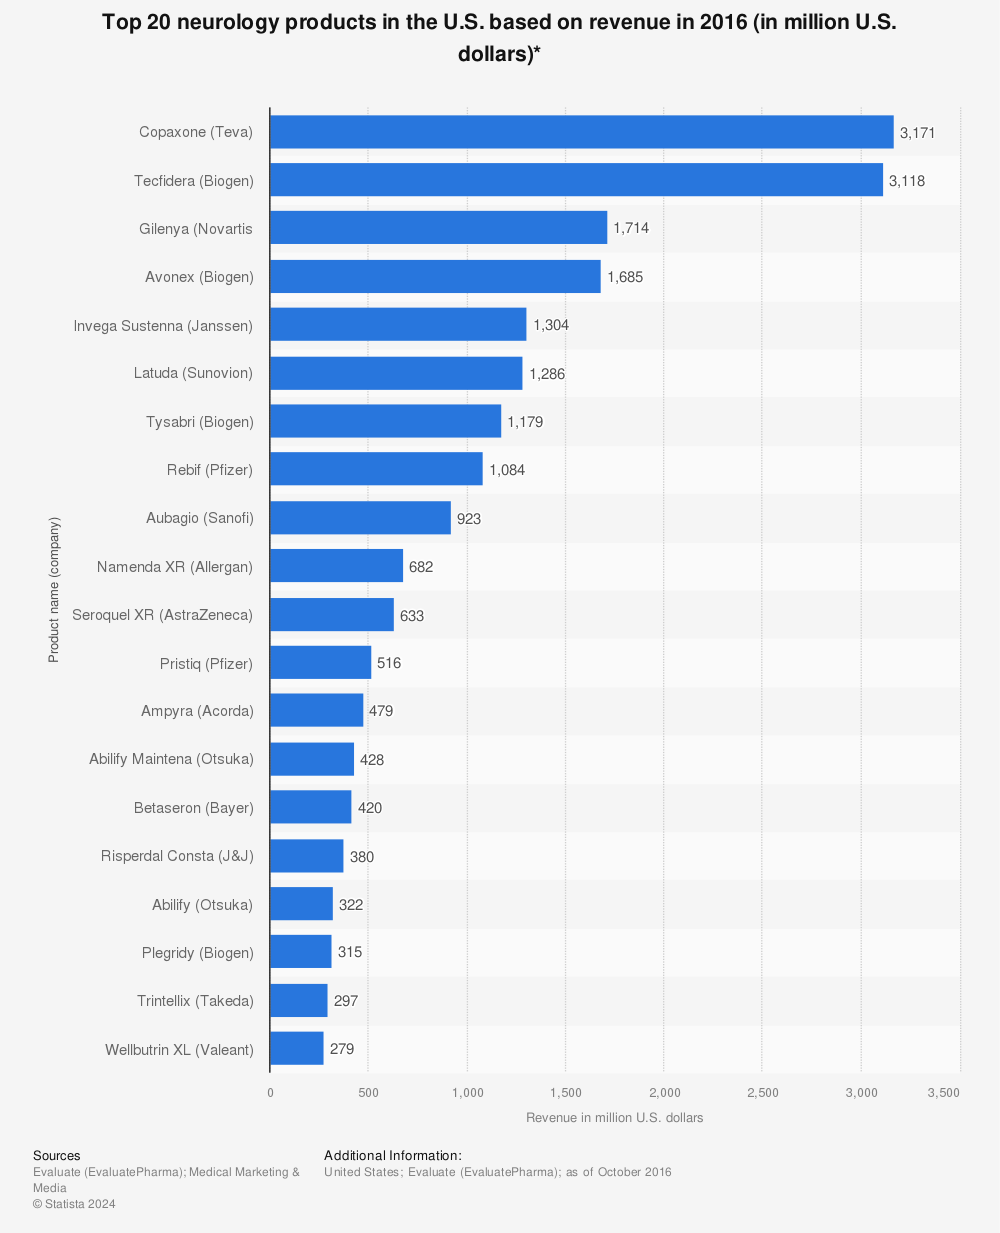 Statistic: Top 20 neurology products in the U.S. based on revenue in 2016 (in million U.S. dollars)* | Statista